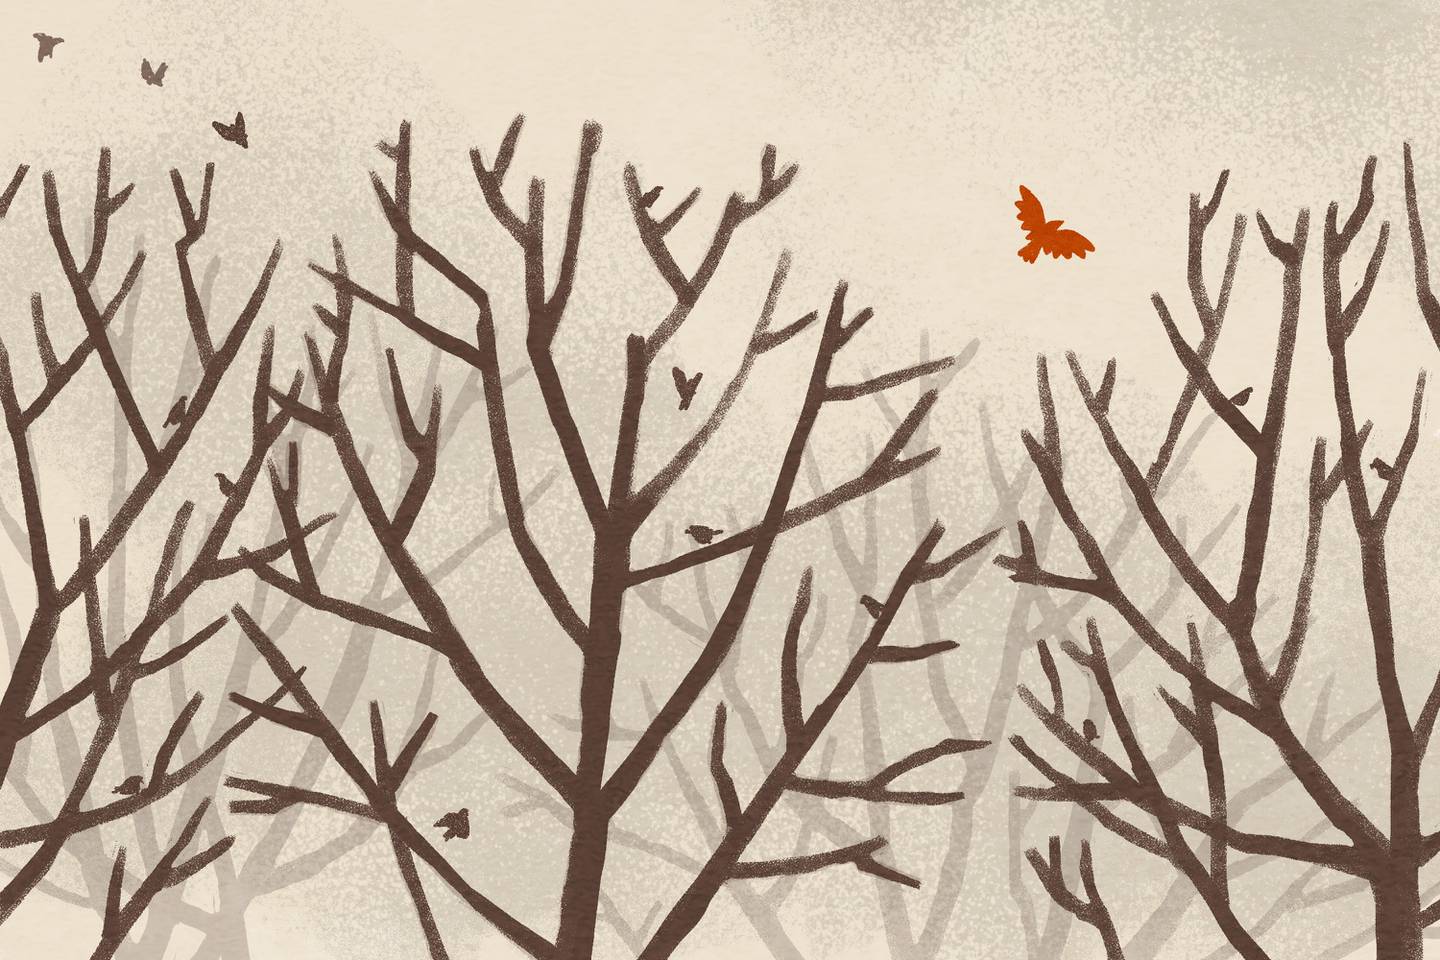 Illustration of one red bird taking flight from leafless trees full of brown sparrows